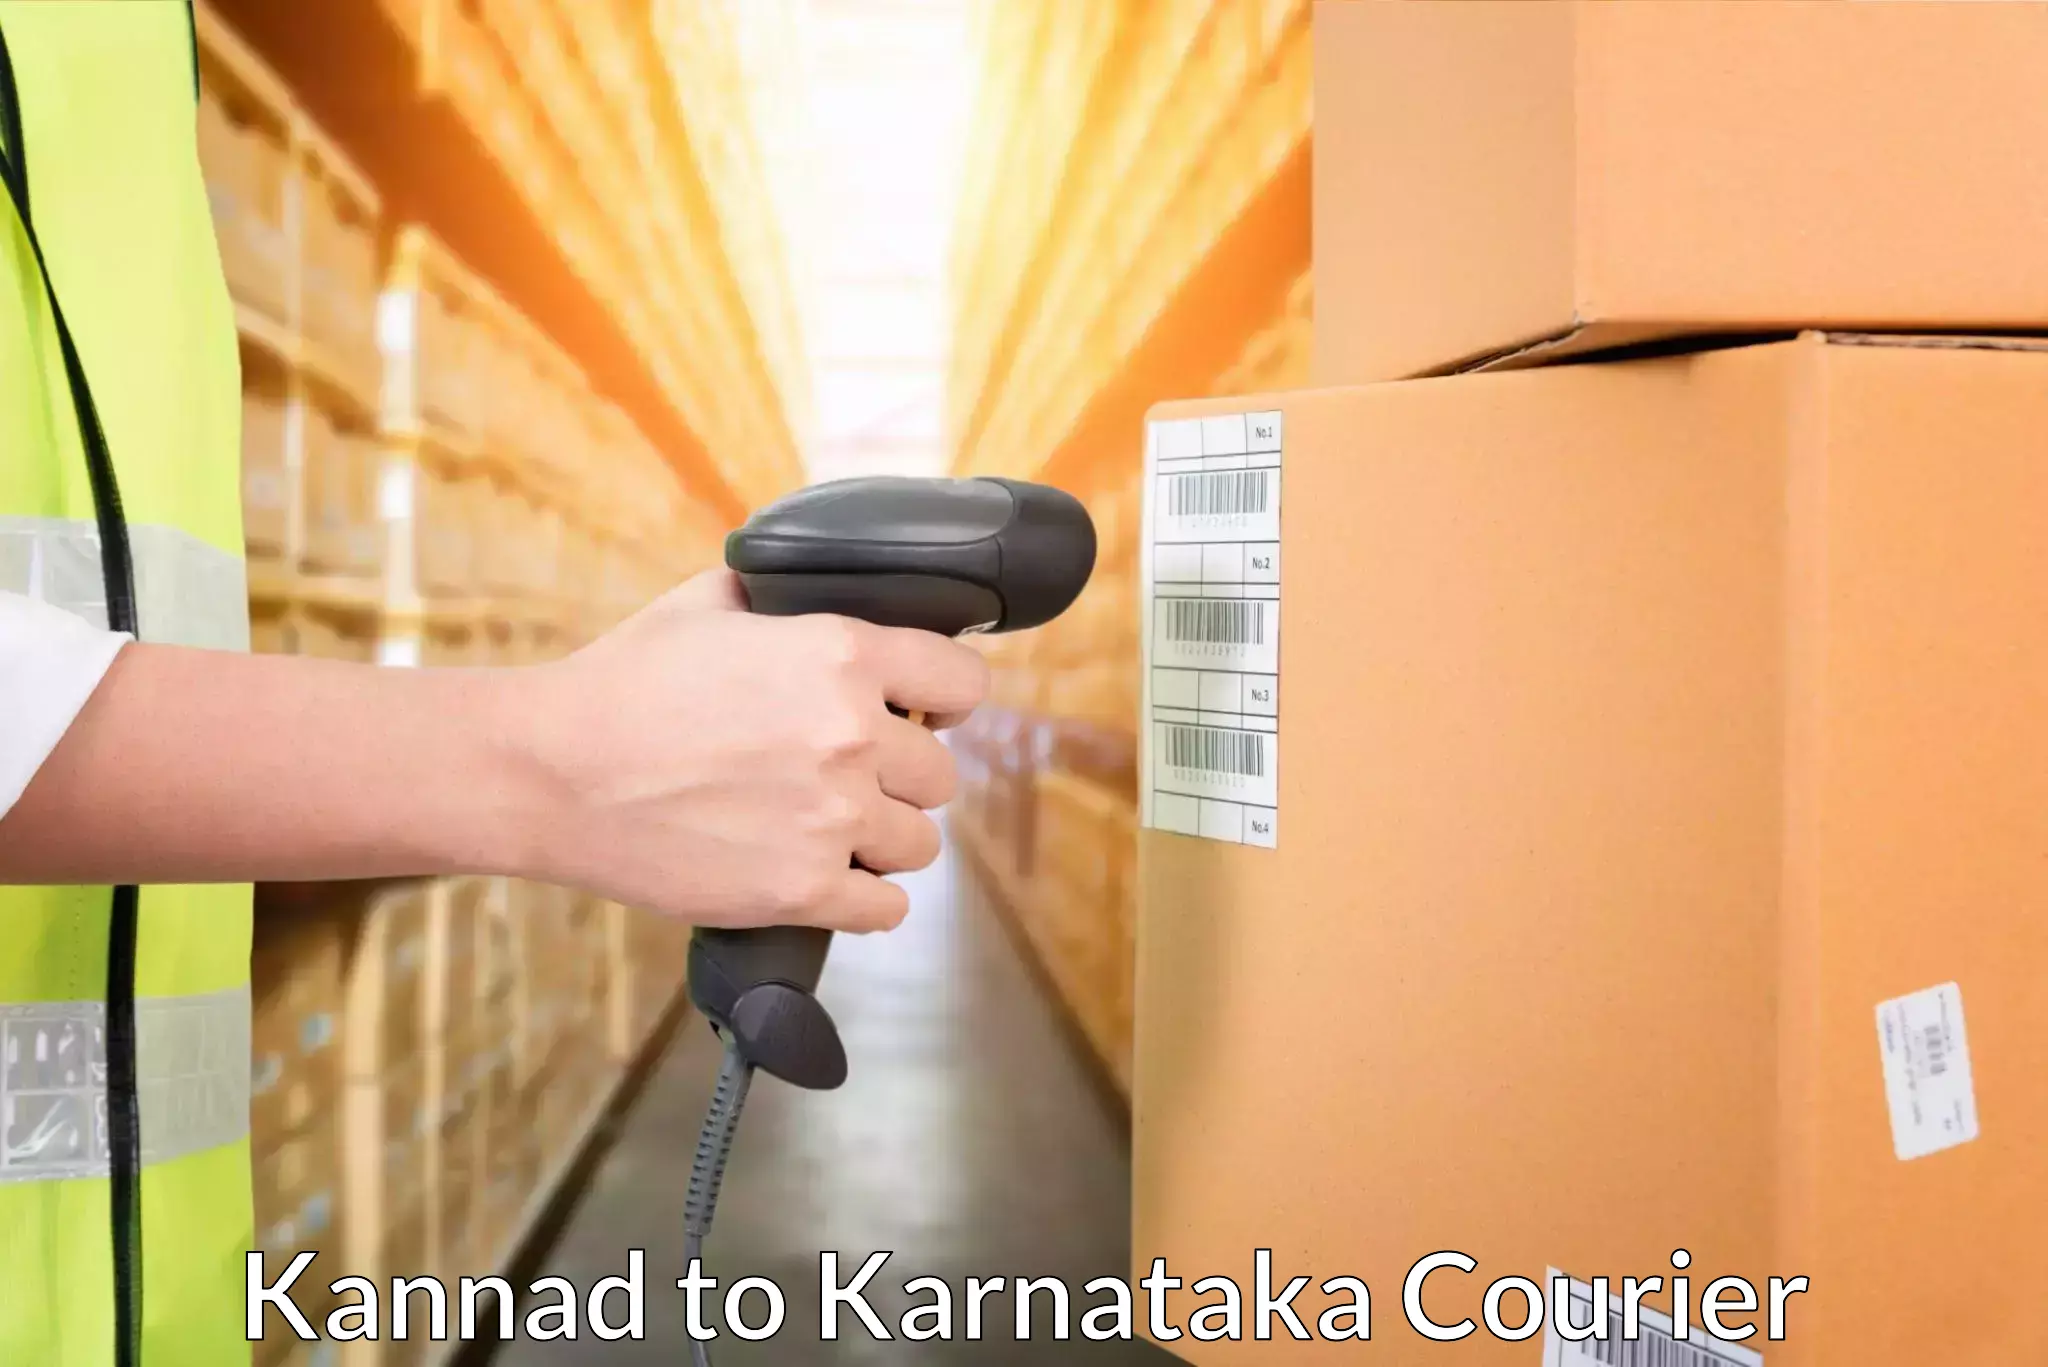 Specialized shipment handling Kannad to Indian Institute of Science Bangalore